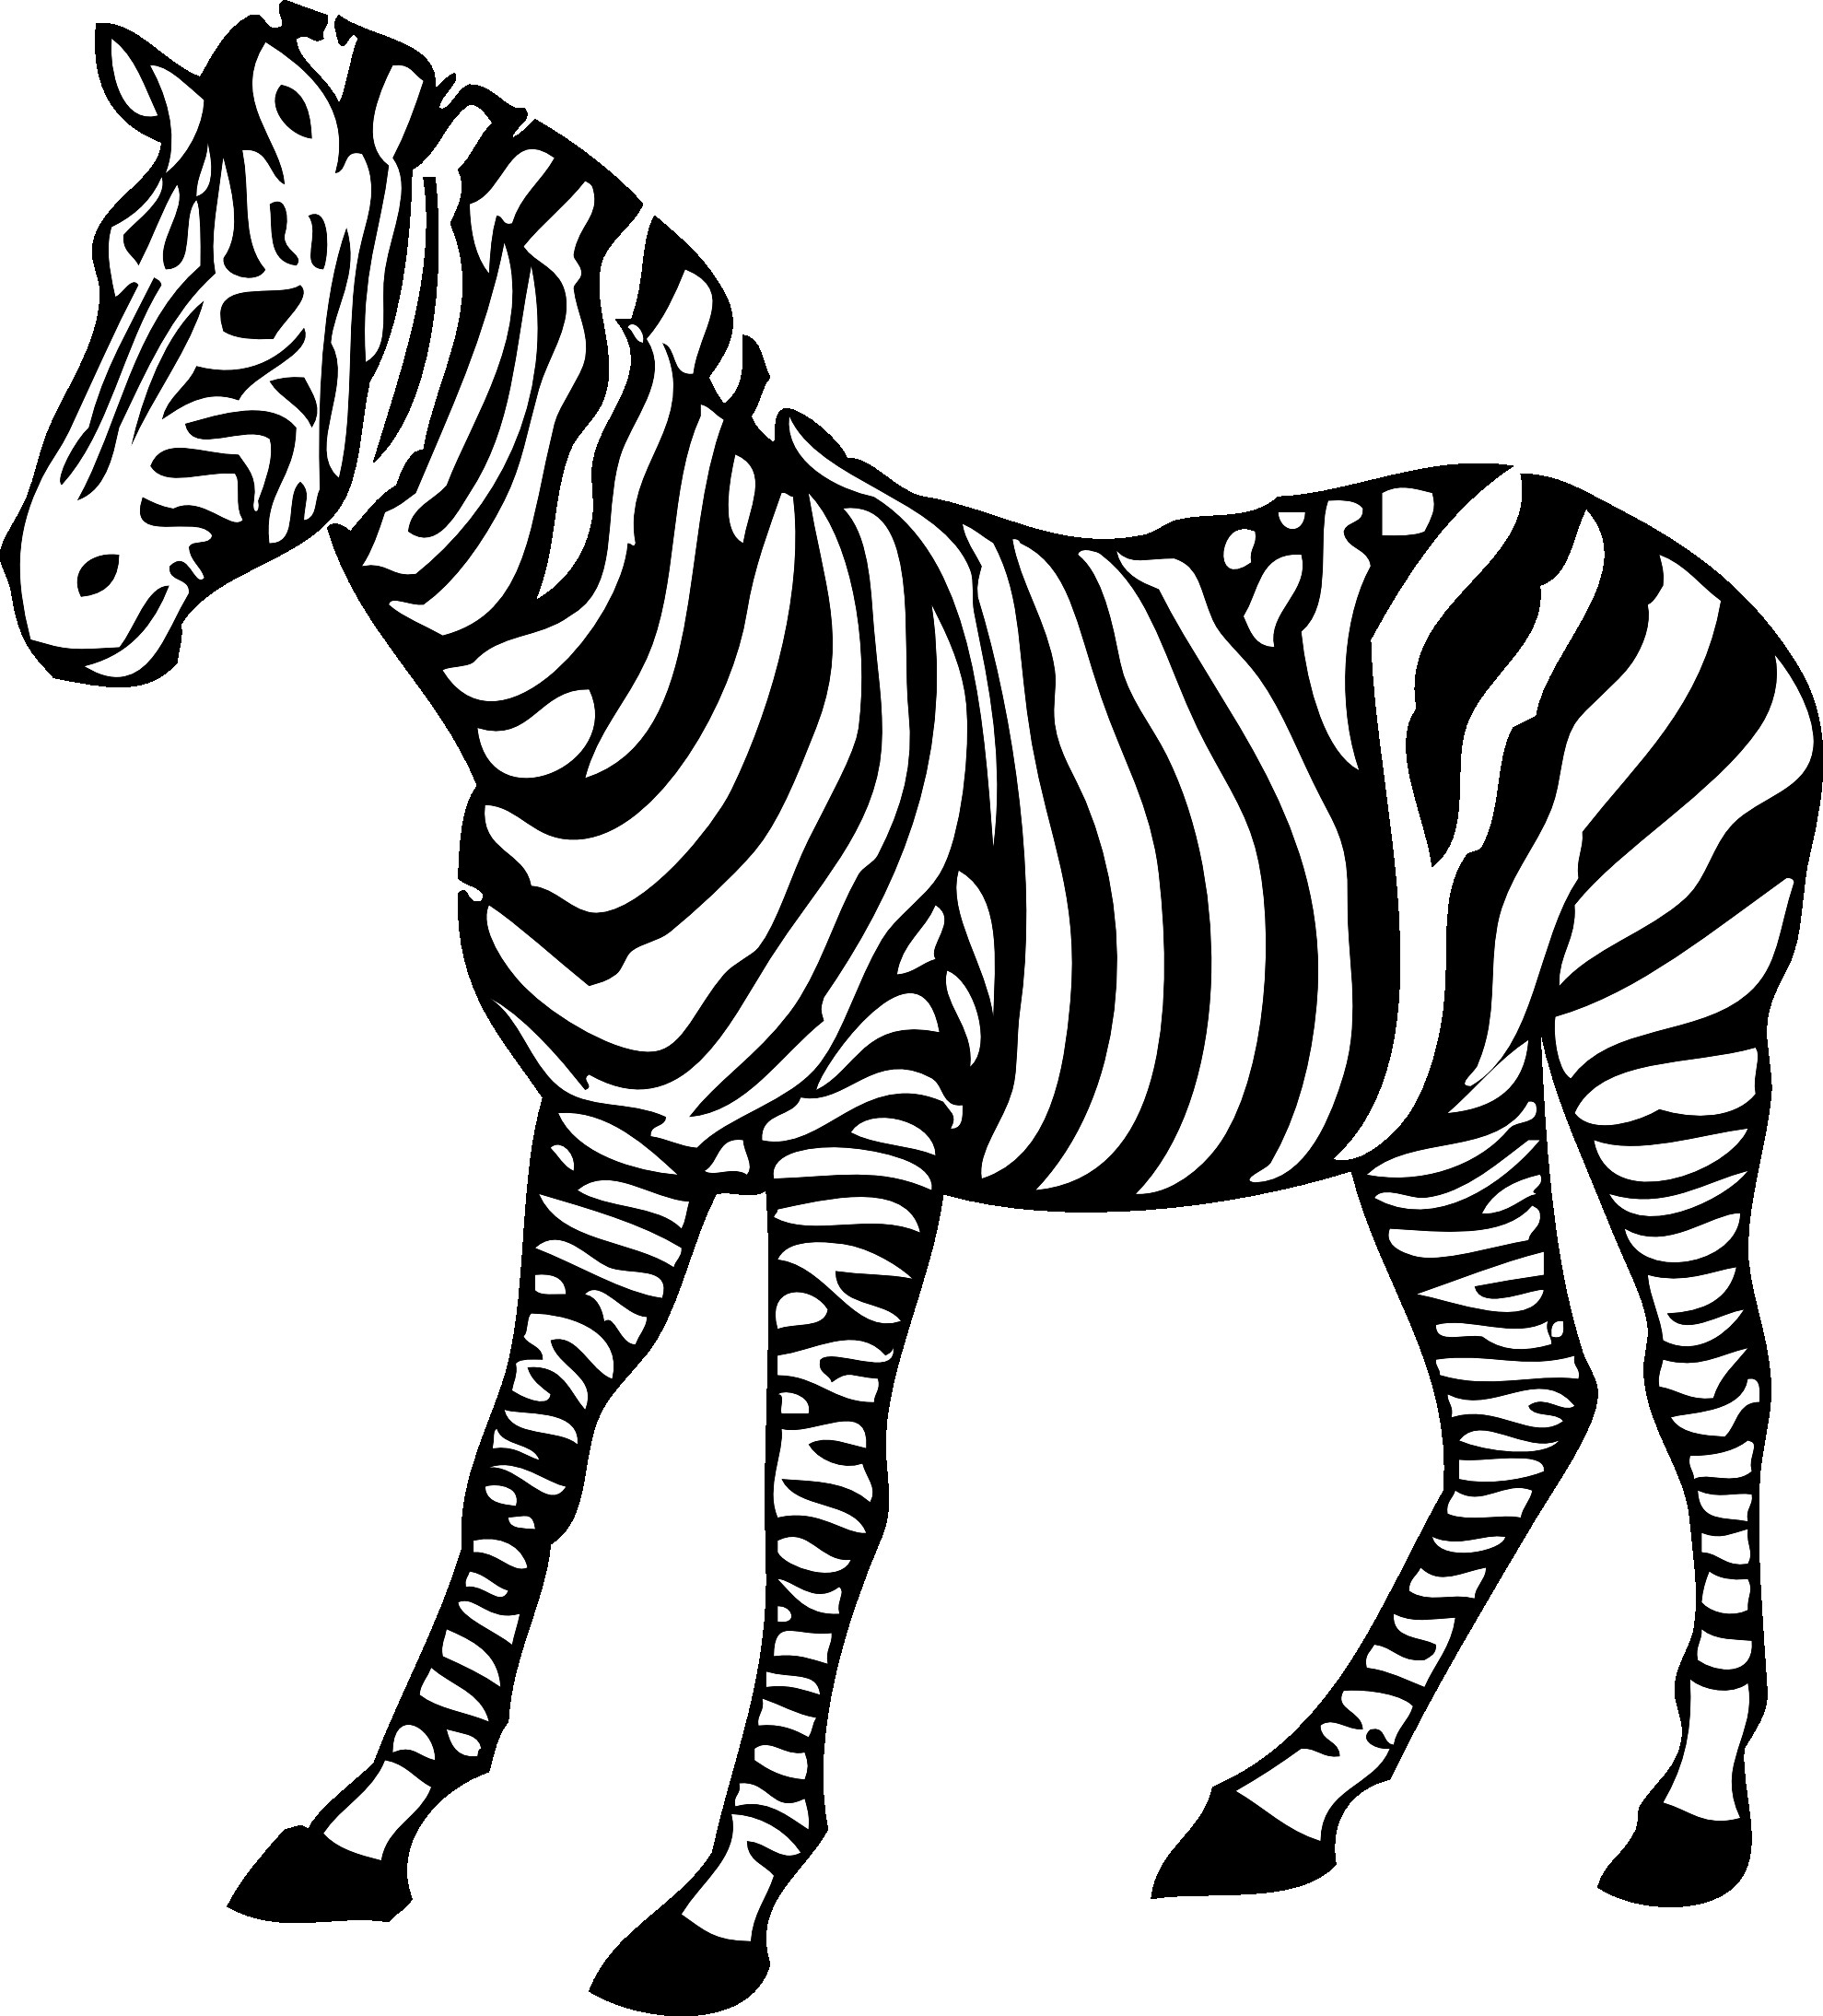 Zebra Print Coloring Pages at Free printable